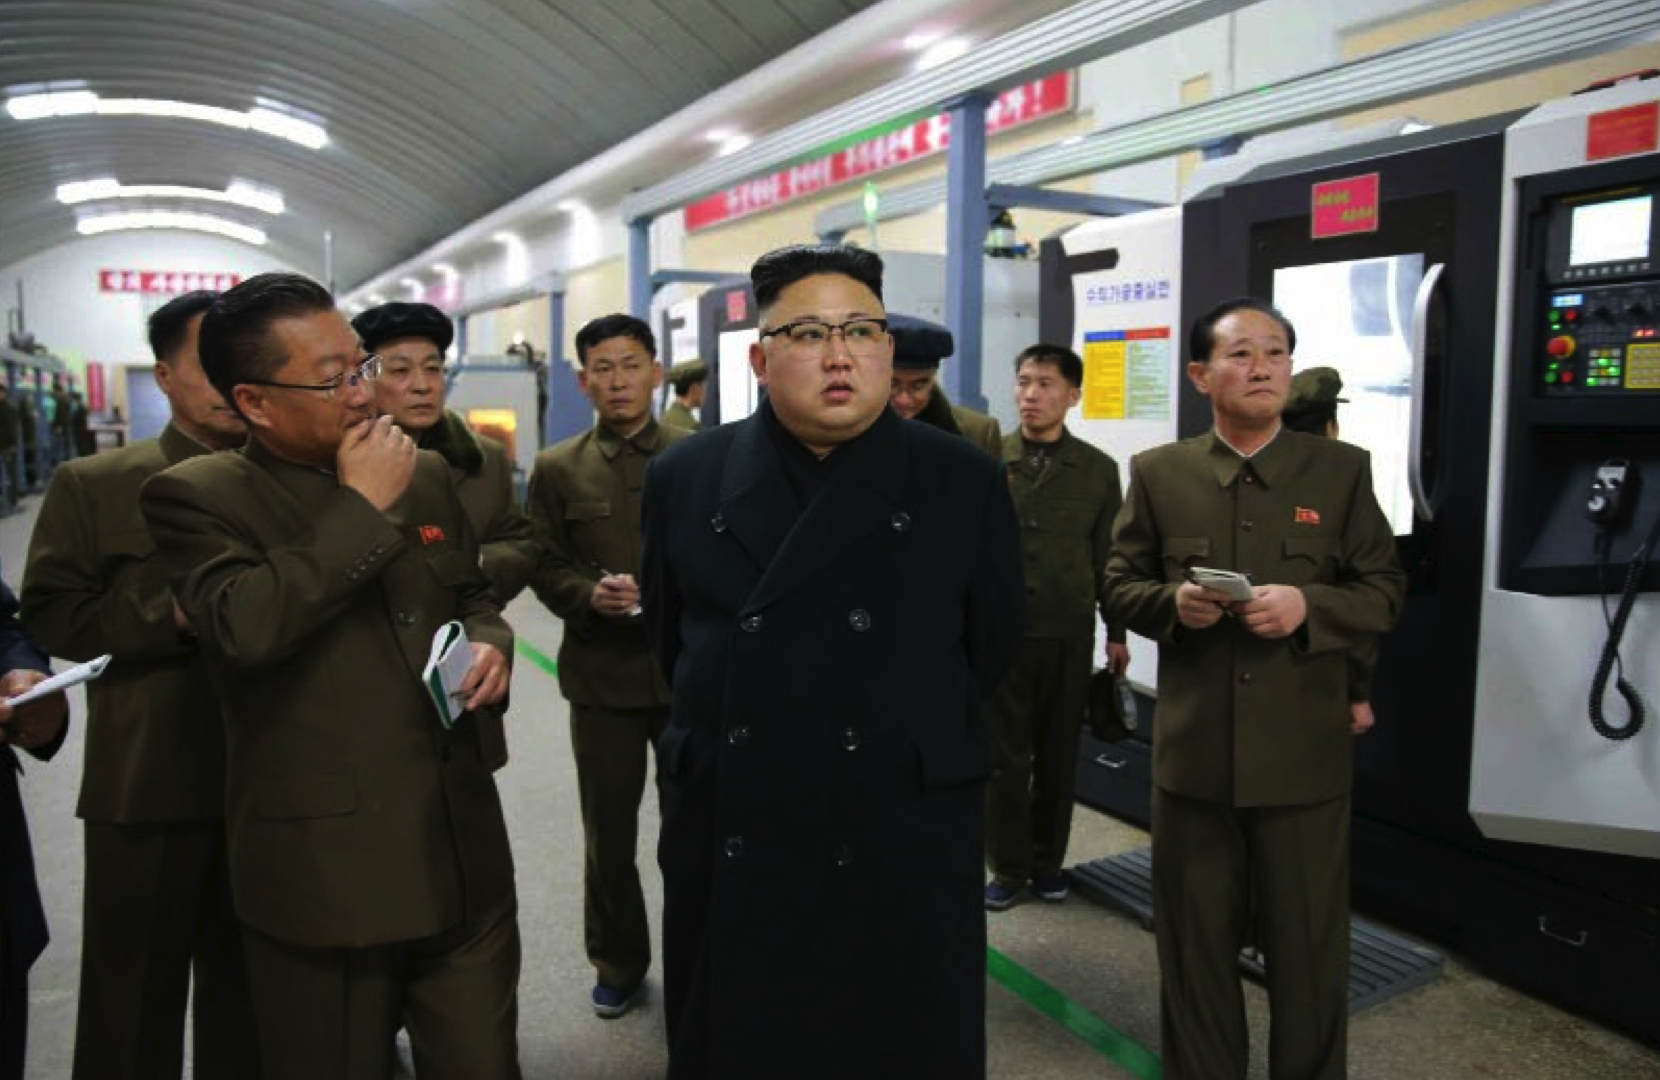 Kim Jong Un is briefed about production at the Kangdong Precision Machine Plant in the suburbs of Pyongyang in a photo which appeared top-center on the front page of the February 7, 2017 edition of WPK daily organ Rodong Sinmun (Photo: Rodong Sinmun).